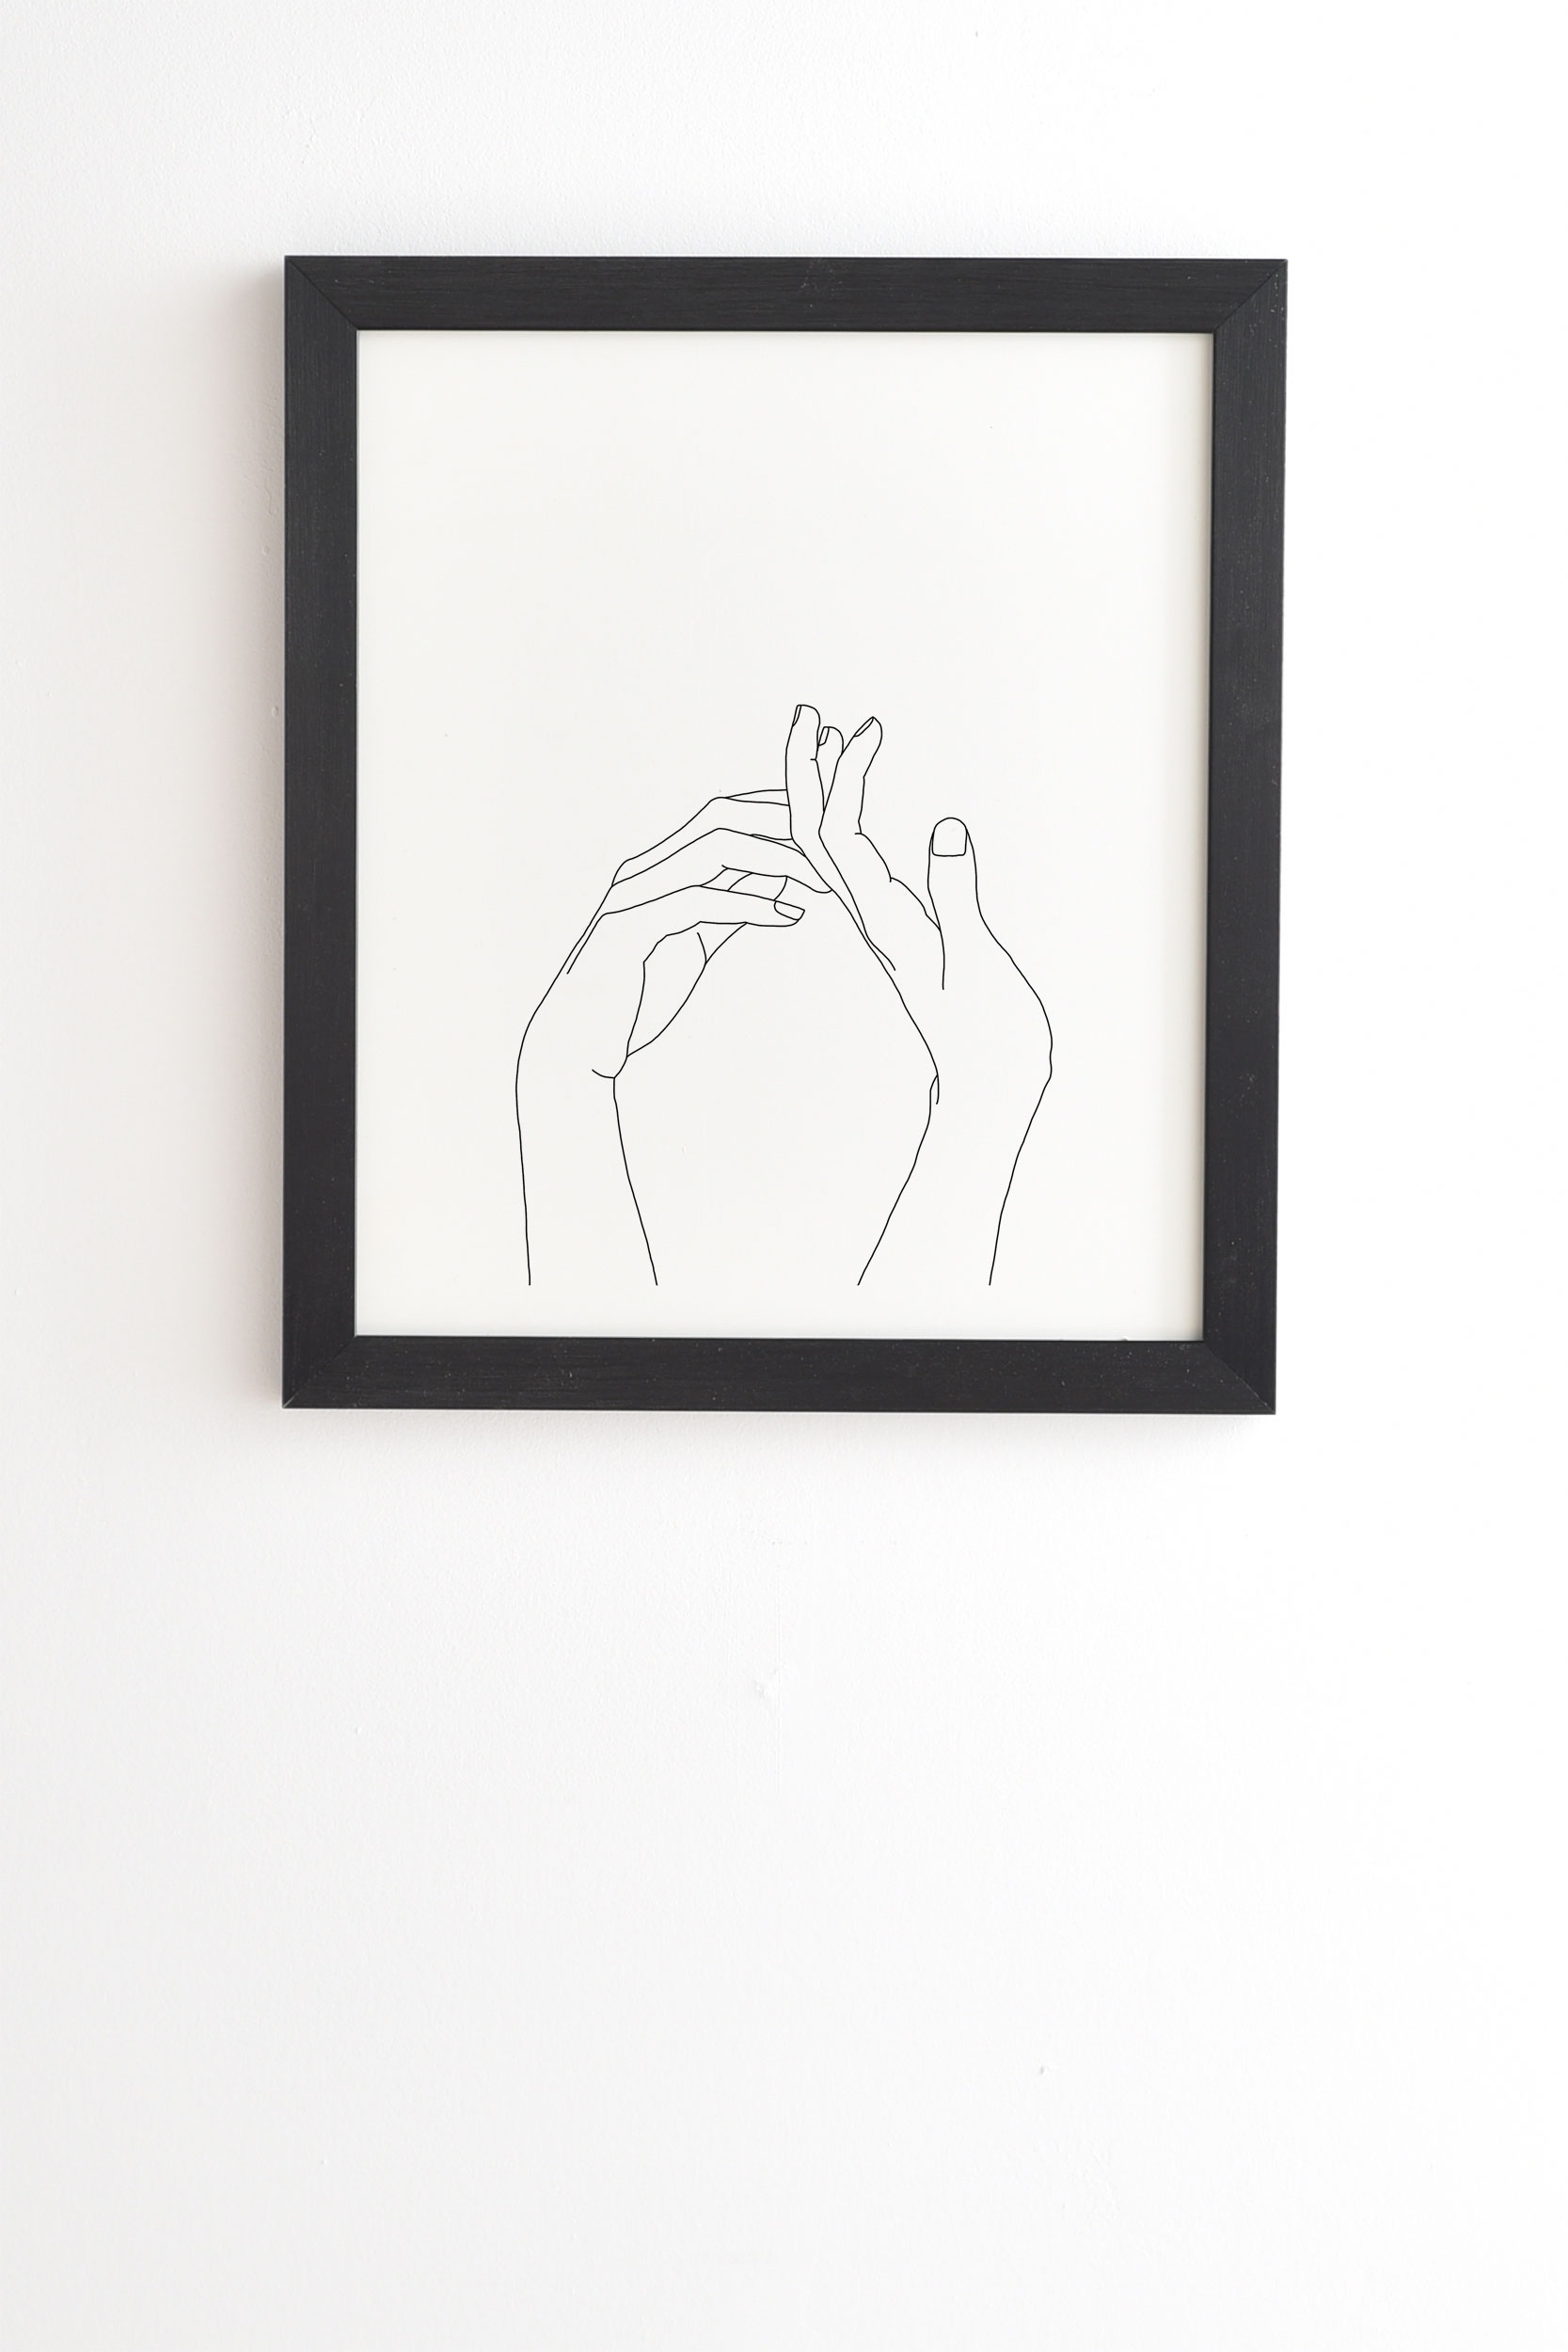 Hands Line Drawing Abi by The Colour Study - Framed Wall Art Basic Black 11" x 13" - Image 0